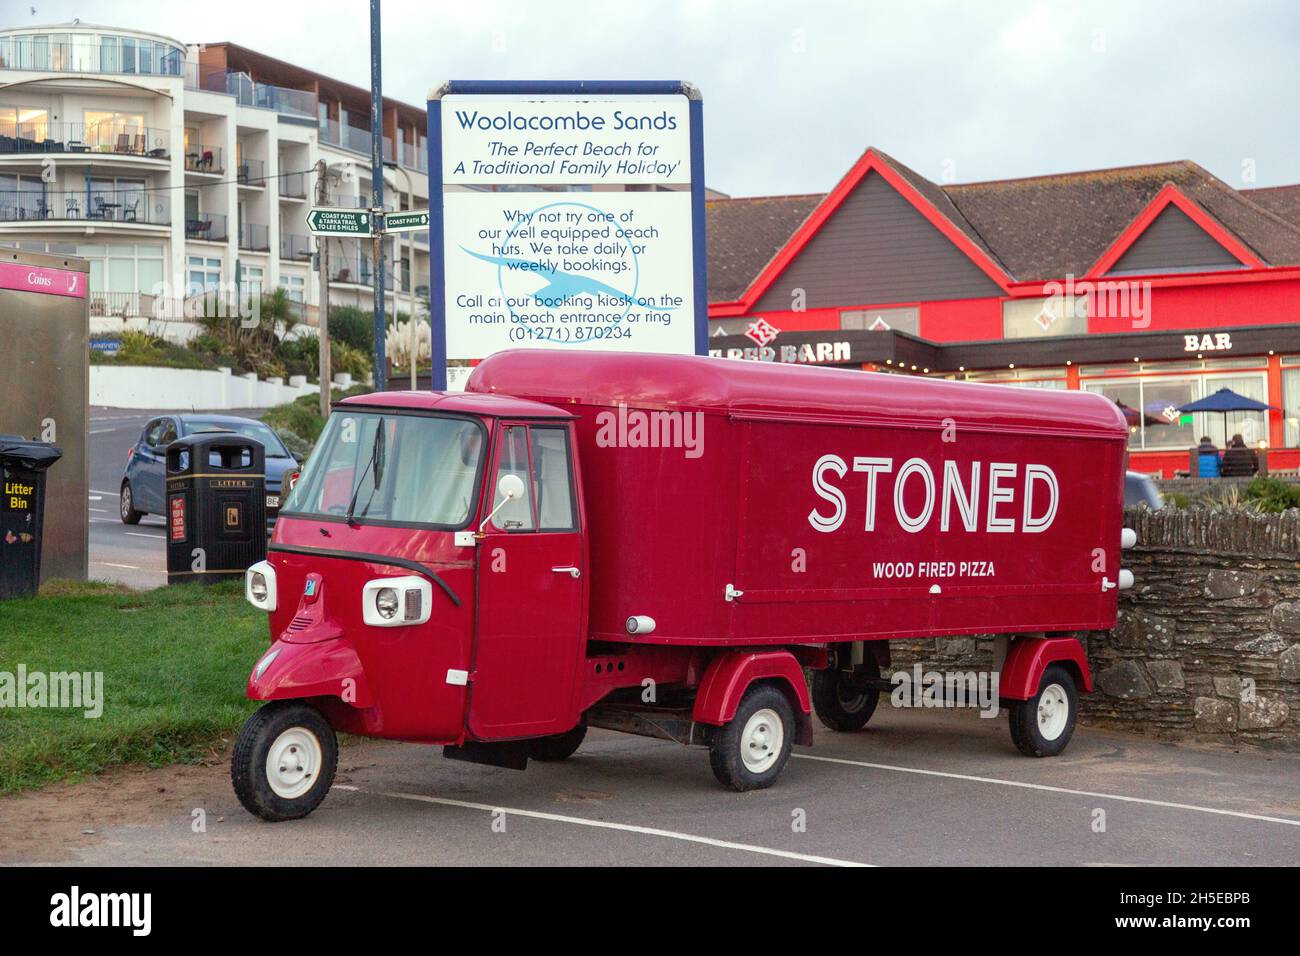 Piaggio TM three wheeled scooter truck converted to a wood fired pizza takeaway truck. Woolacombe, Devon , England, United Kingdom. Stock Photo